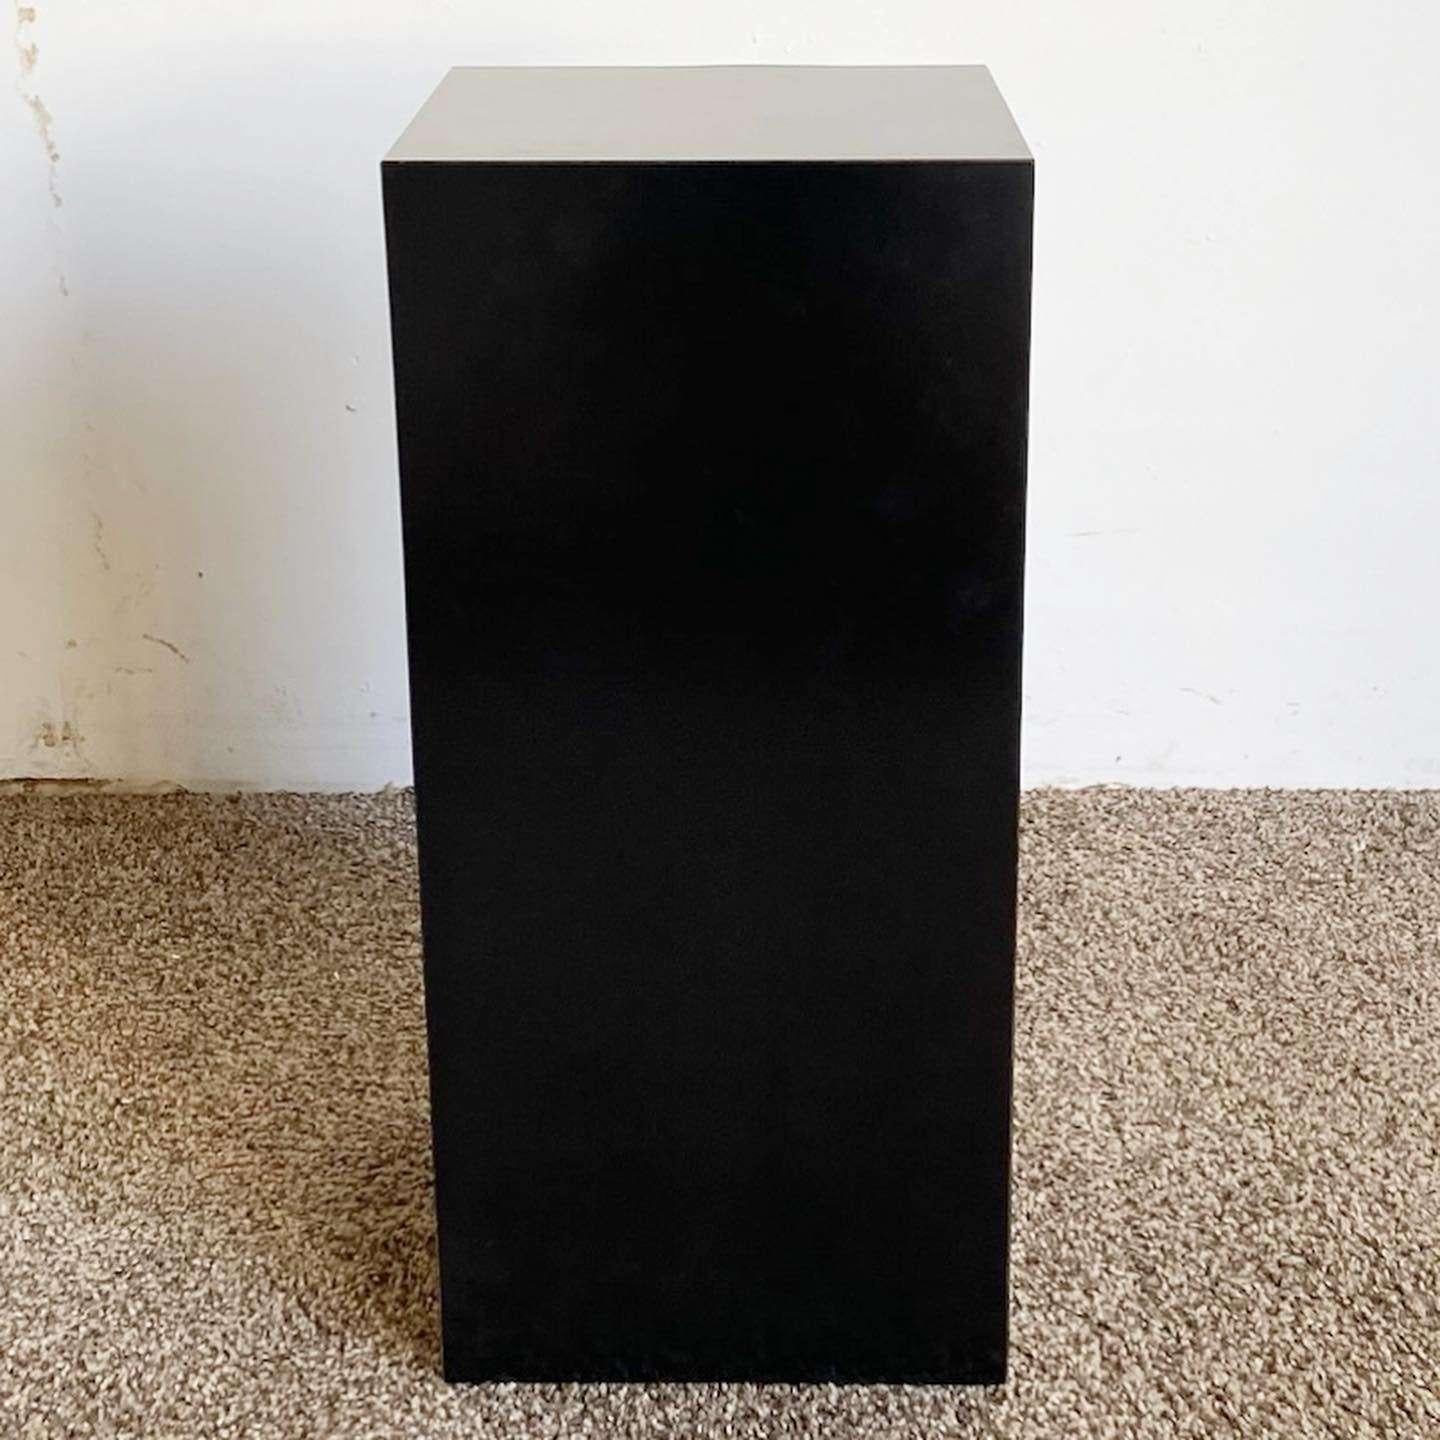 Exceptional vintage postmodern rectangular pedestal/side table. Features a black lacquer laminate.
